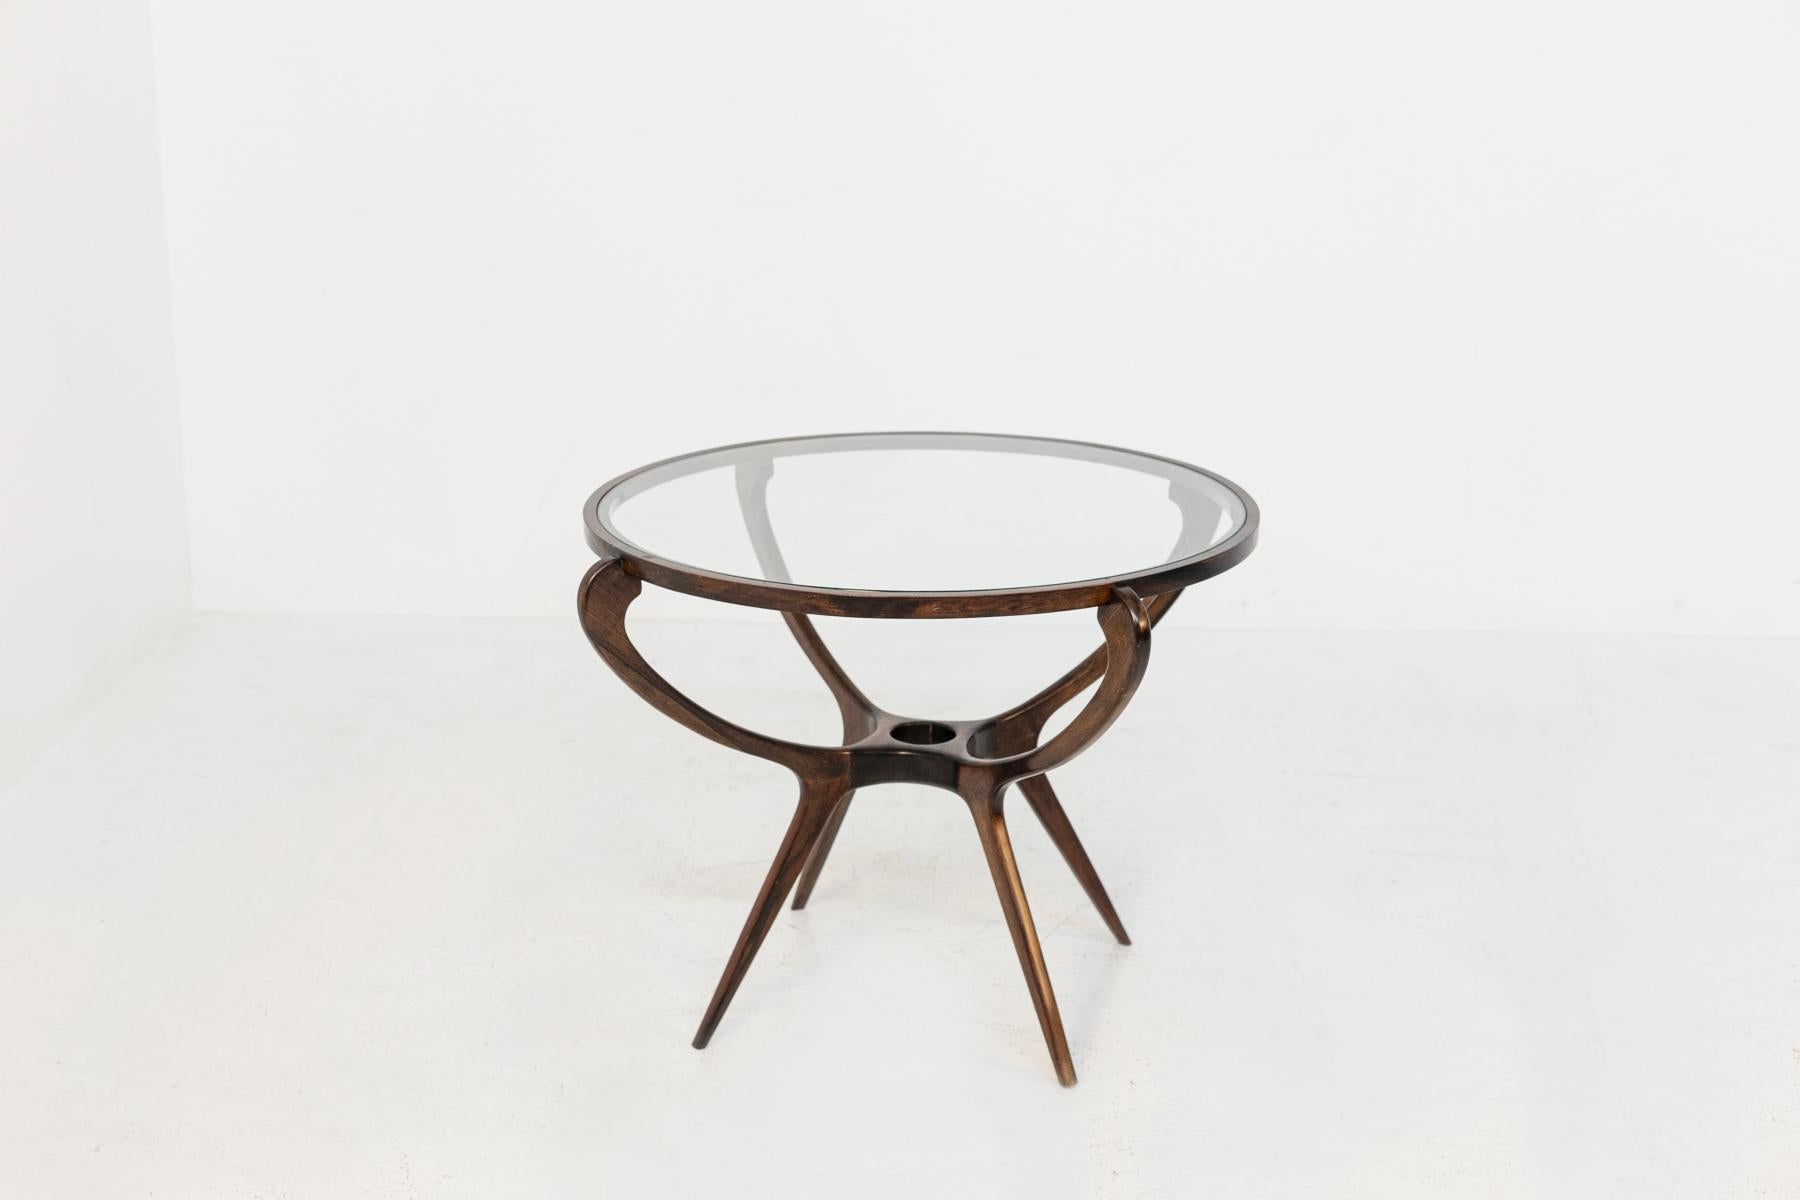 Gorgeous wooden side table designed by Giuseppe Scapinelli in the 1960s, fine Italian craftsmanship.
The coffee table has a geometric structure completely made of fine wood, supported by 4 straight legs that widen slightly, while the base of the